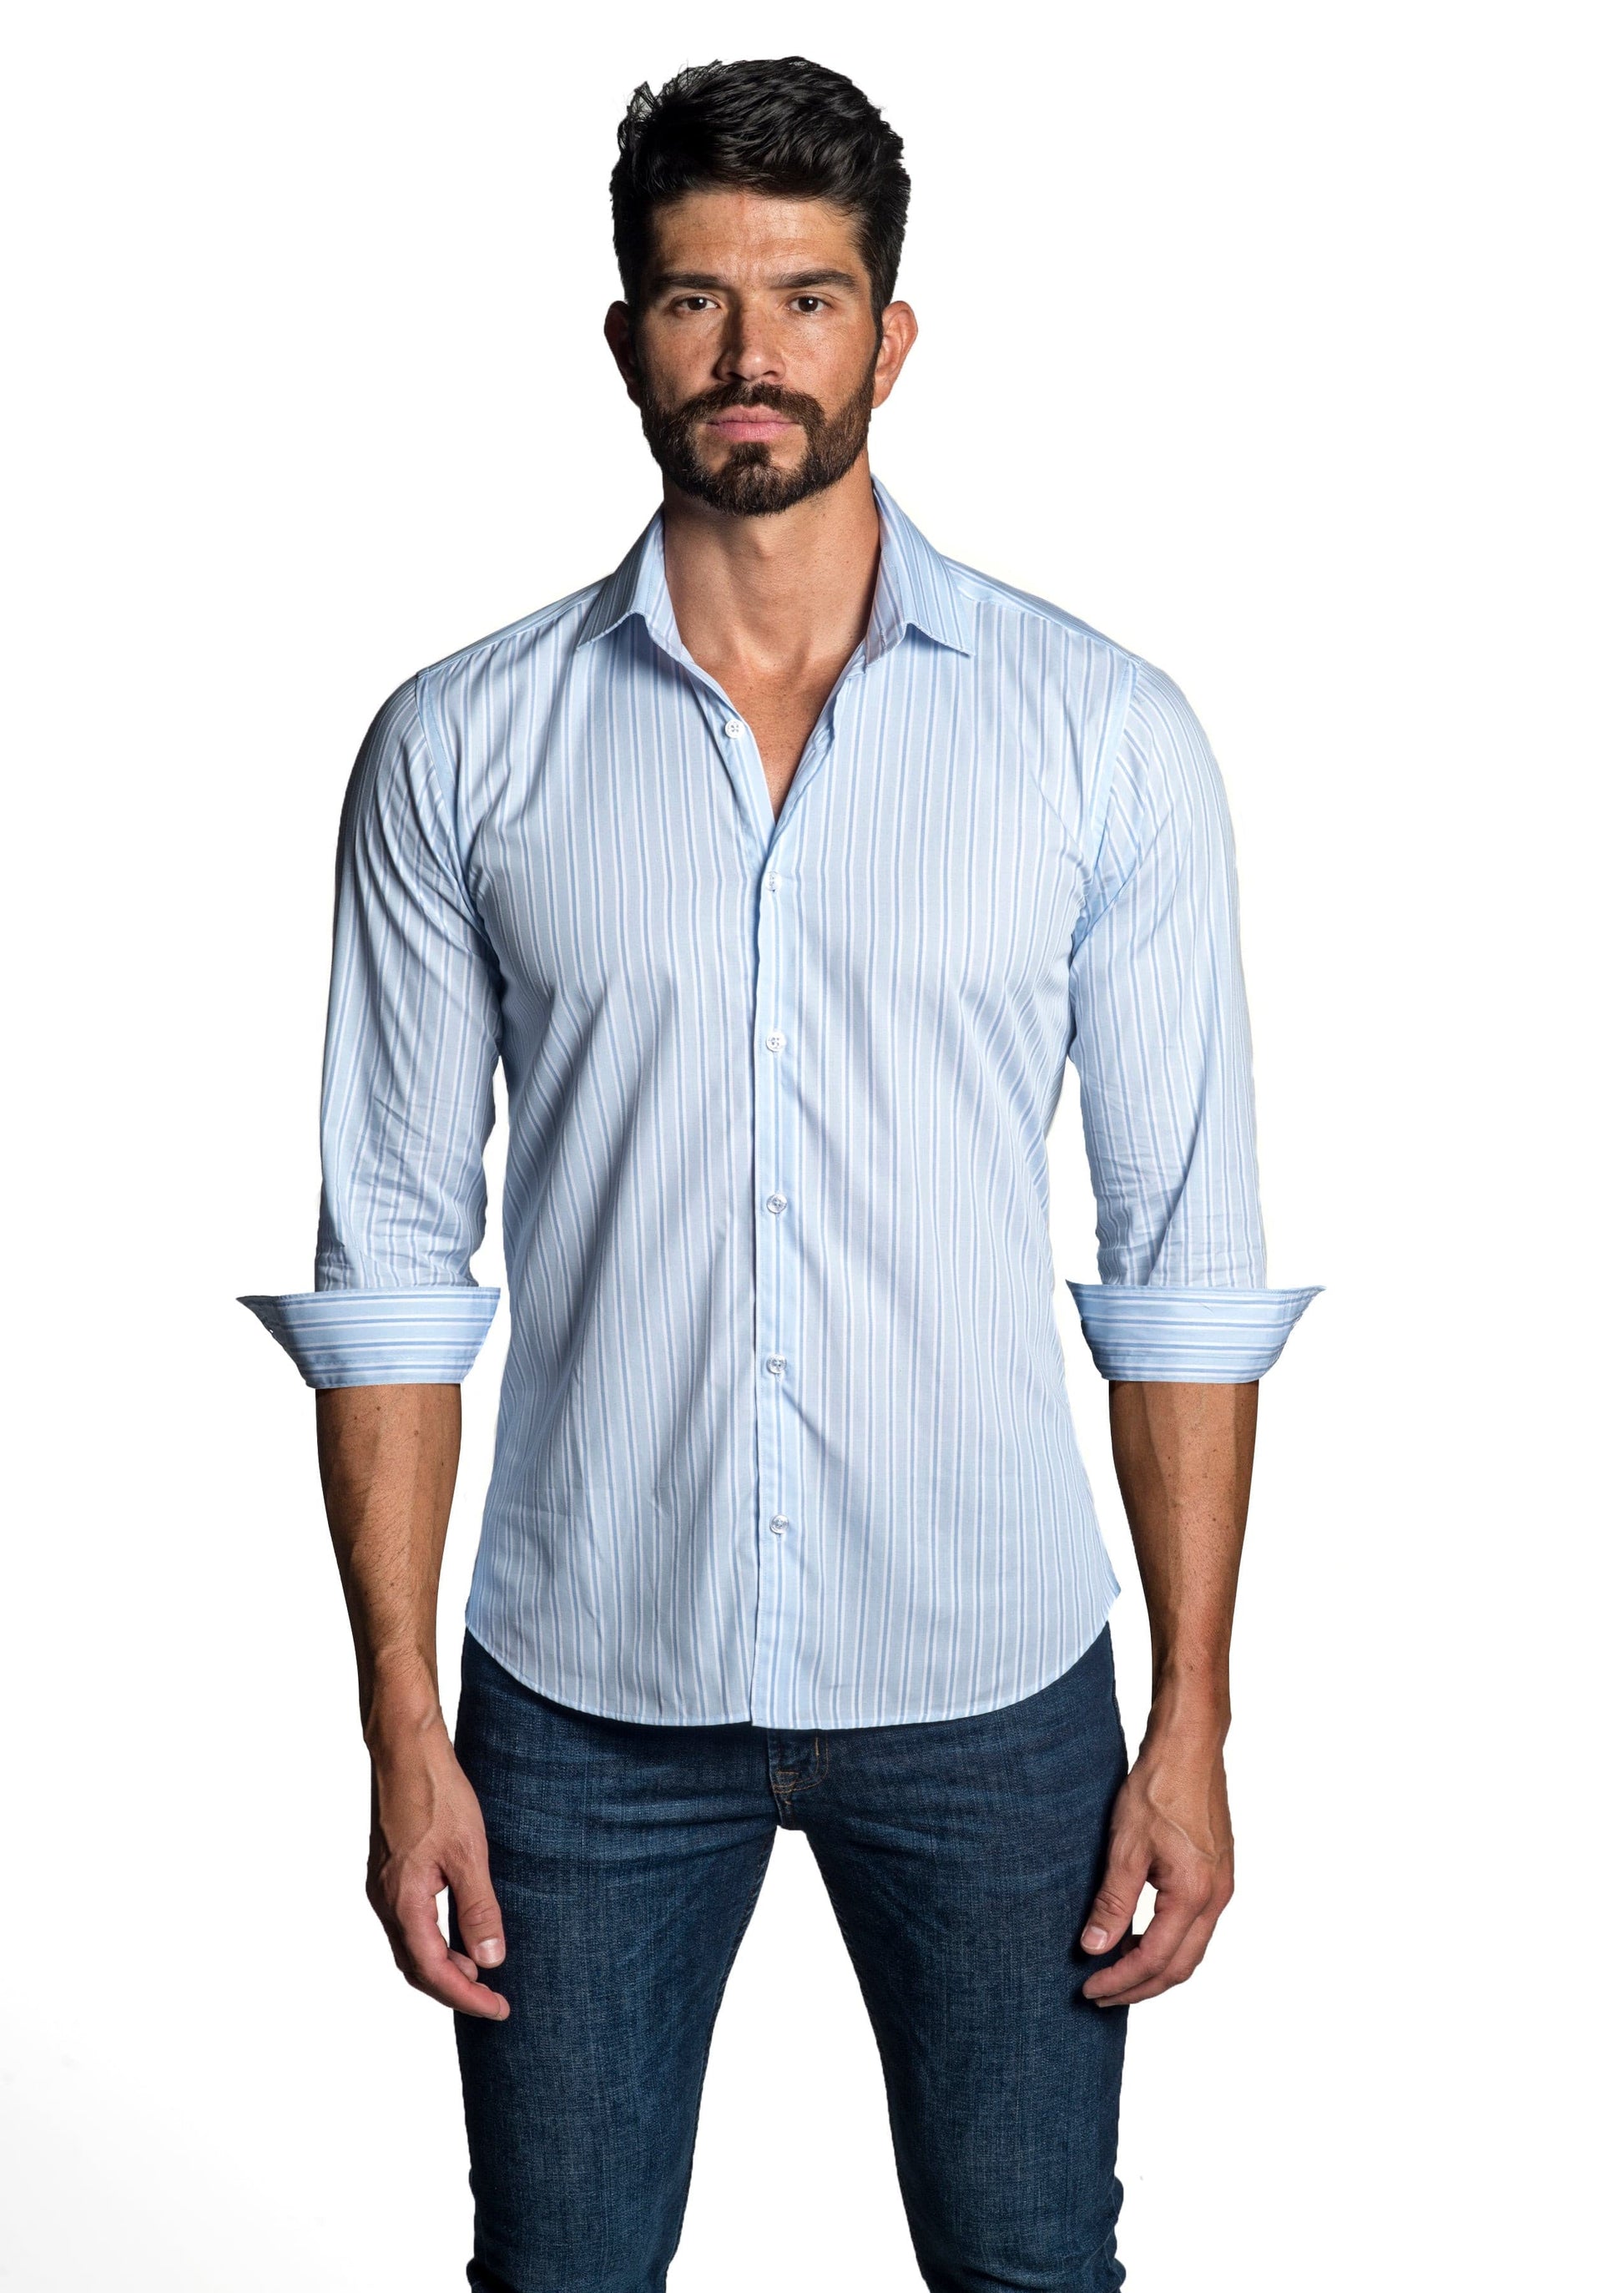 Blue + White Long Sleeve Shirt T-6616 - Front - Jared Lang